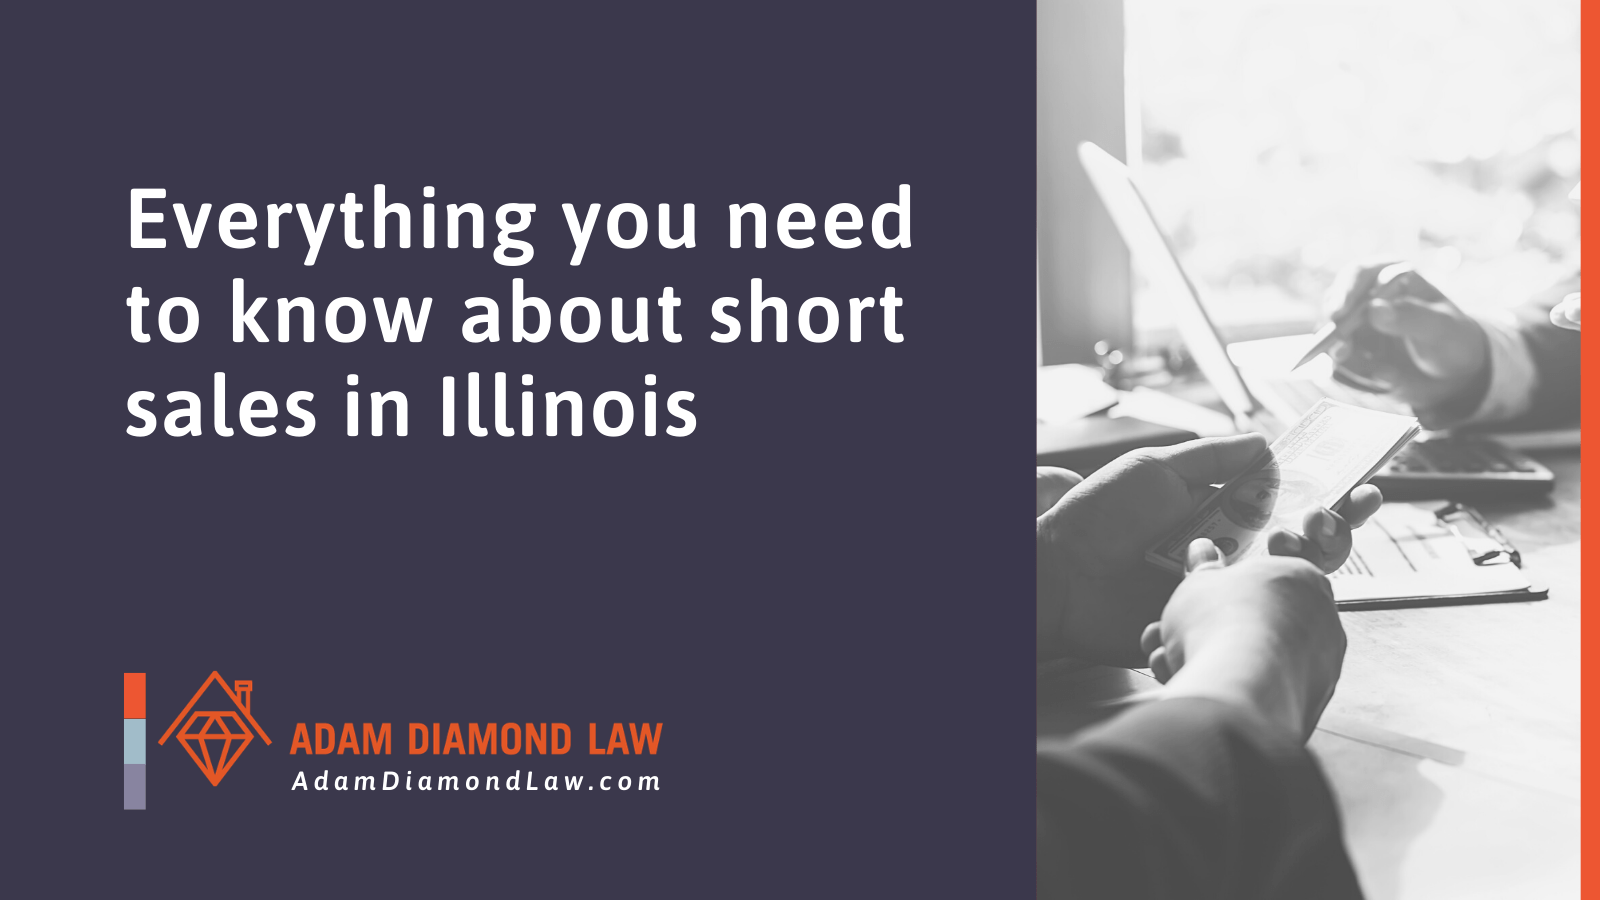 short sales in Illinois - Adam Diamond Law | McHenry, IL Residential Real Estate Lawyer